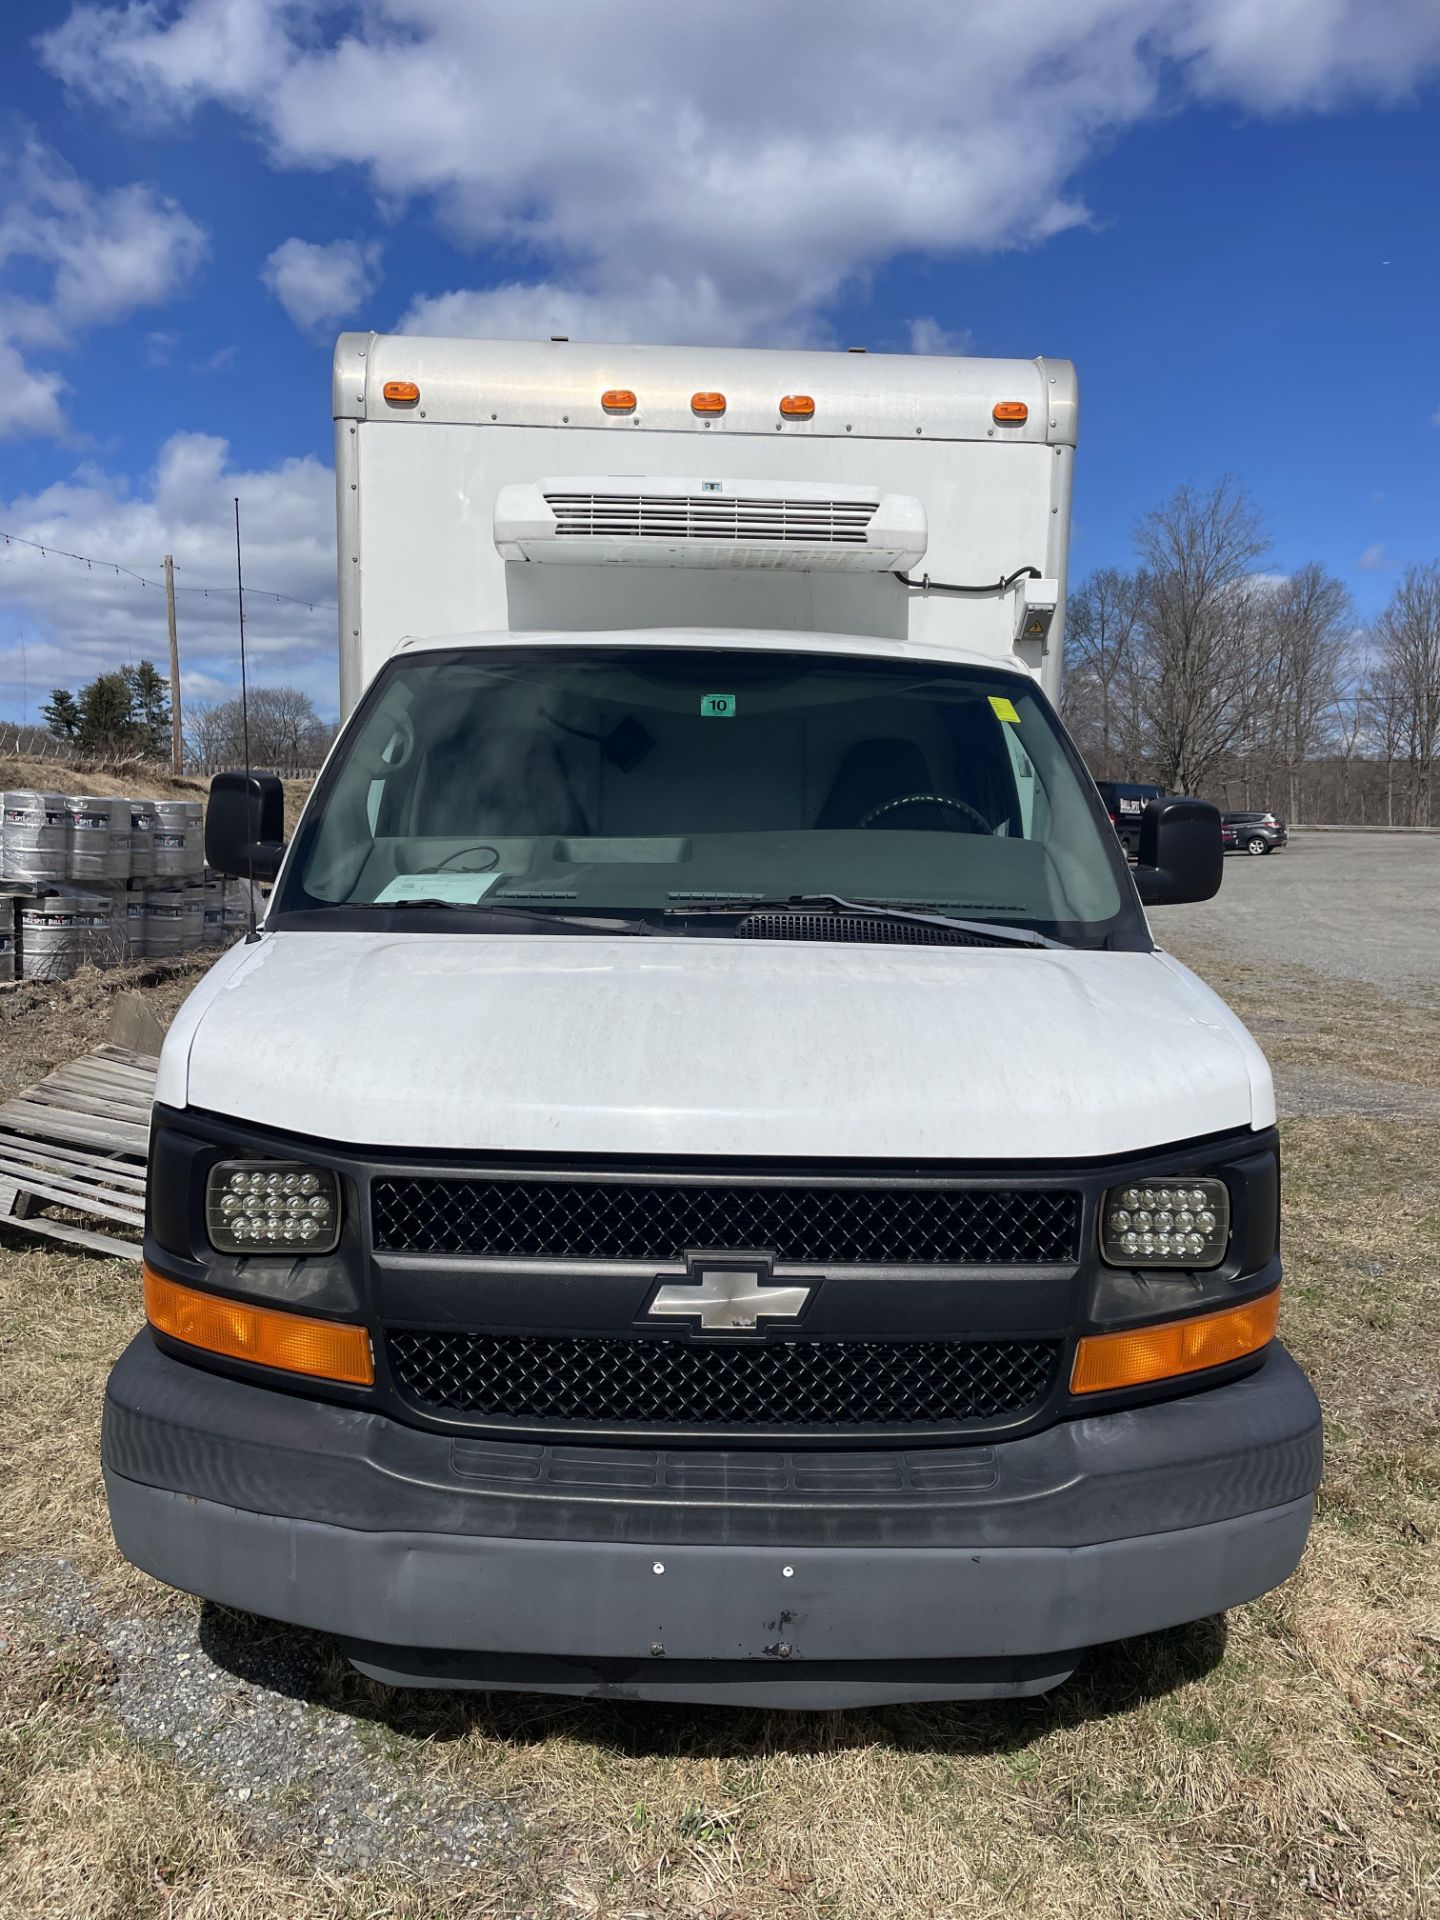 2005 Chevrolet Box Truck w/ 10' Refrigerated Box, Odom: 19,653, 1300Lb Capacity Lift Gate, Gas, Aut - Image 4 of 15